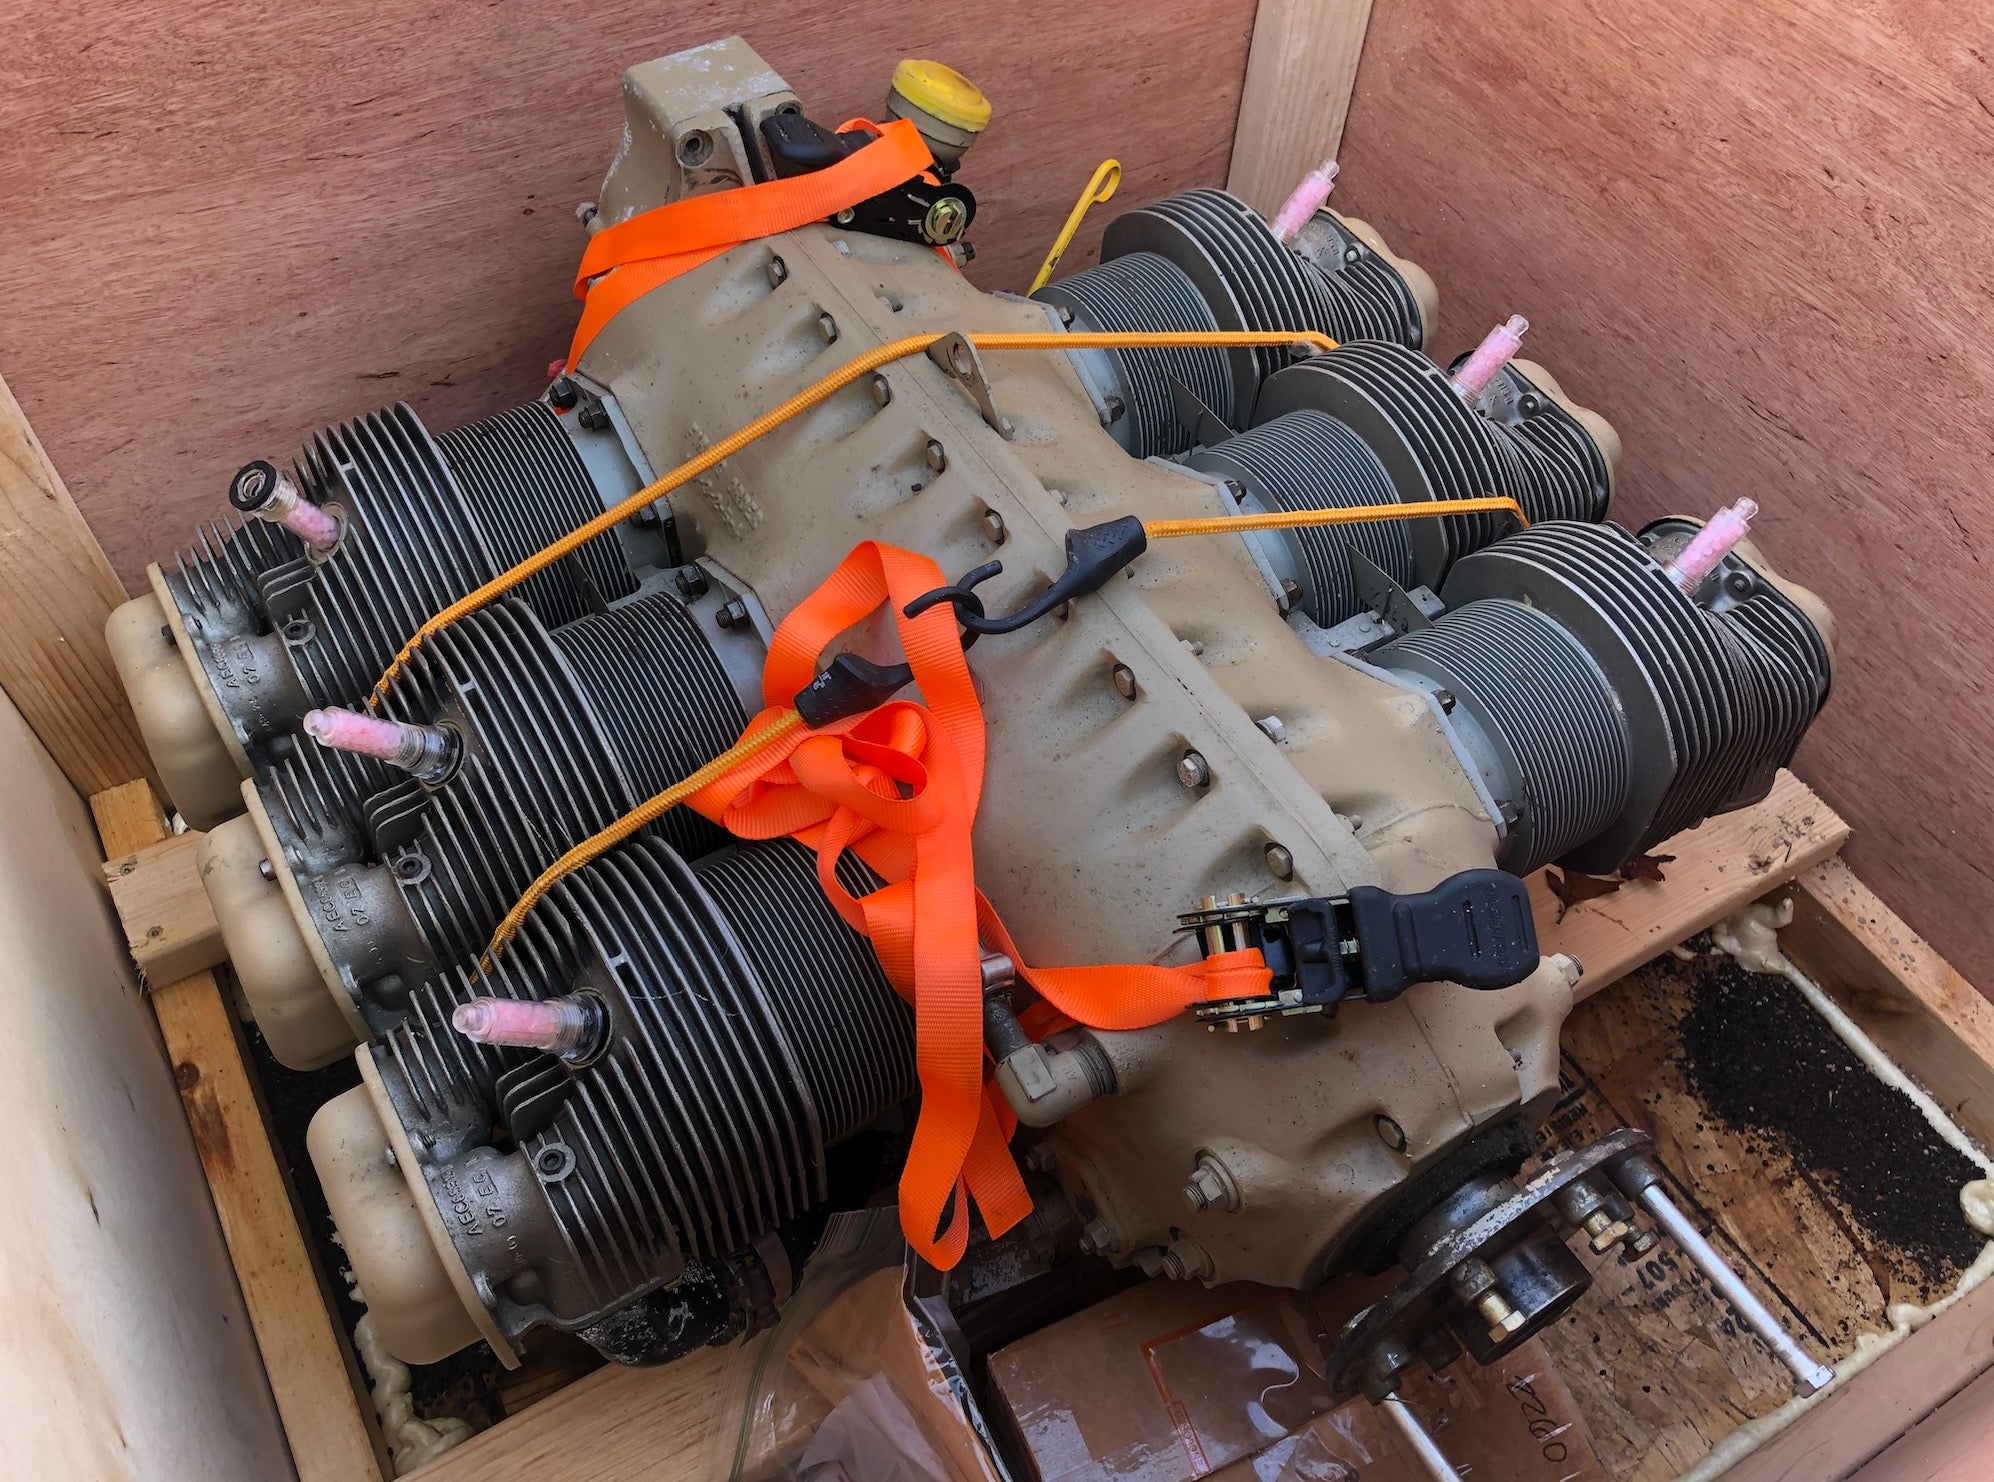 Engine in crate